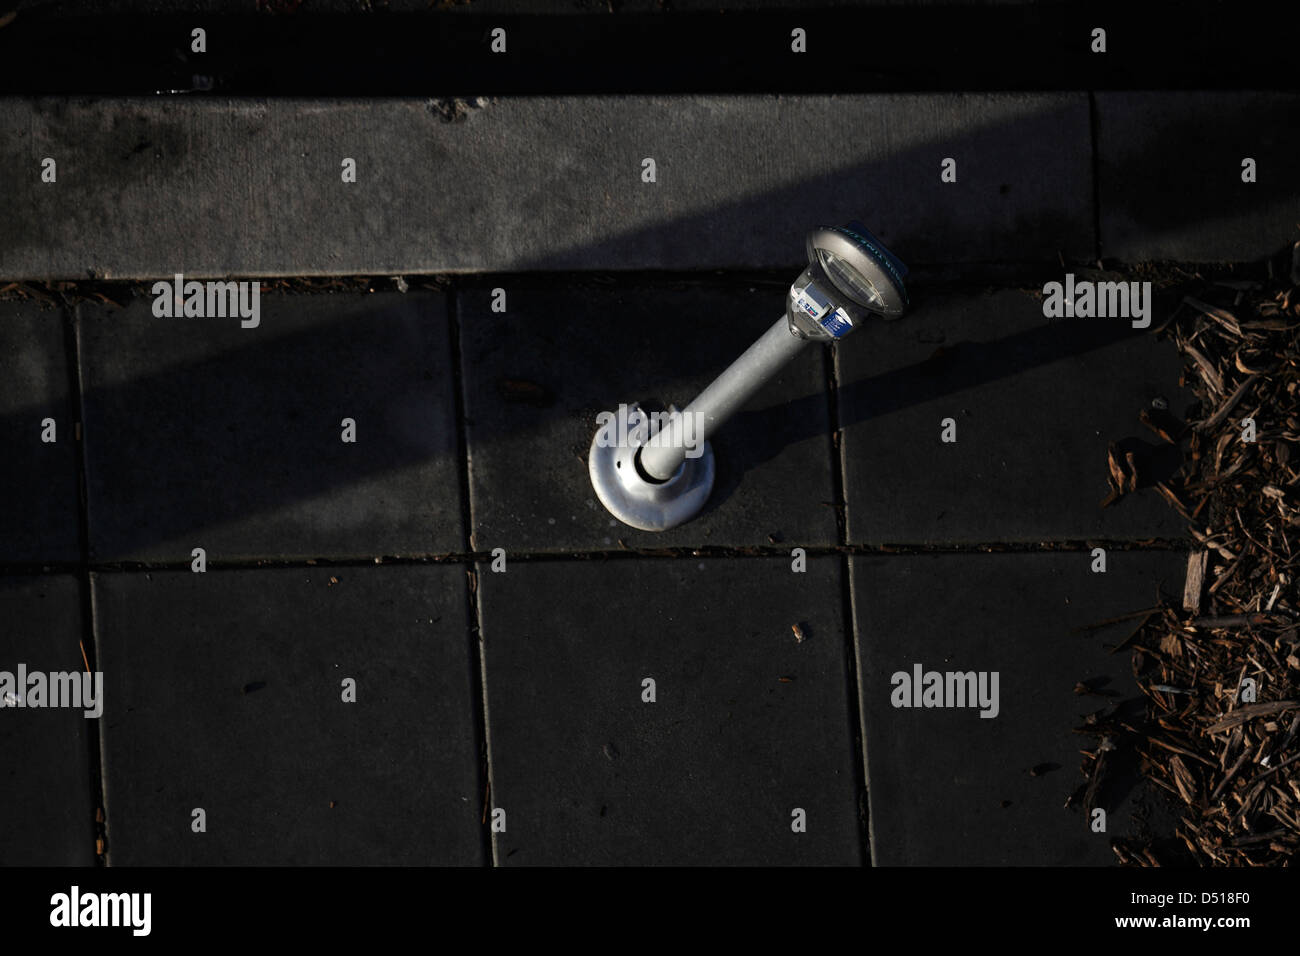 Parking meter from above. Stock Photo